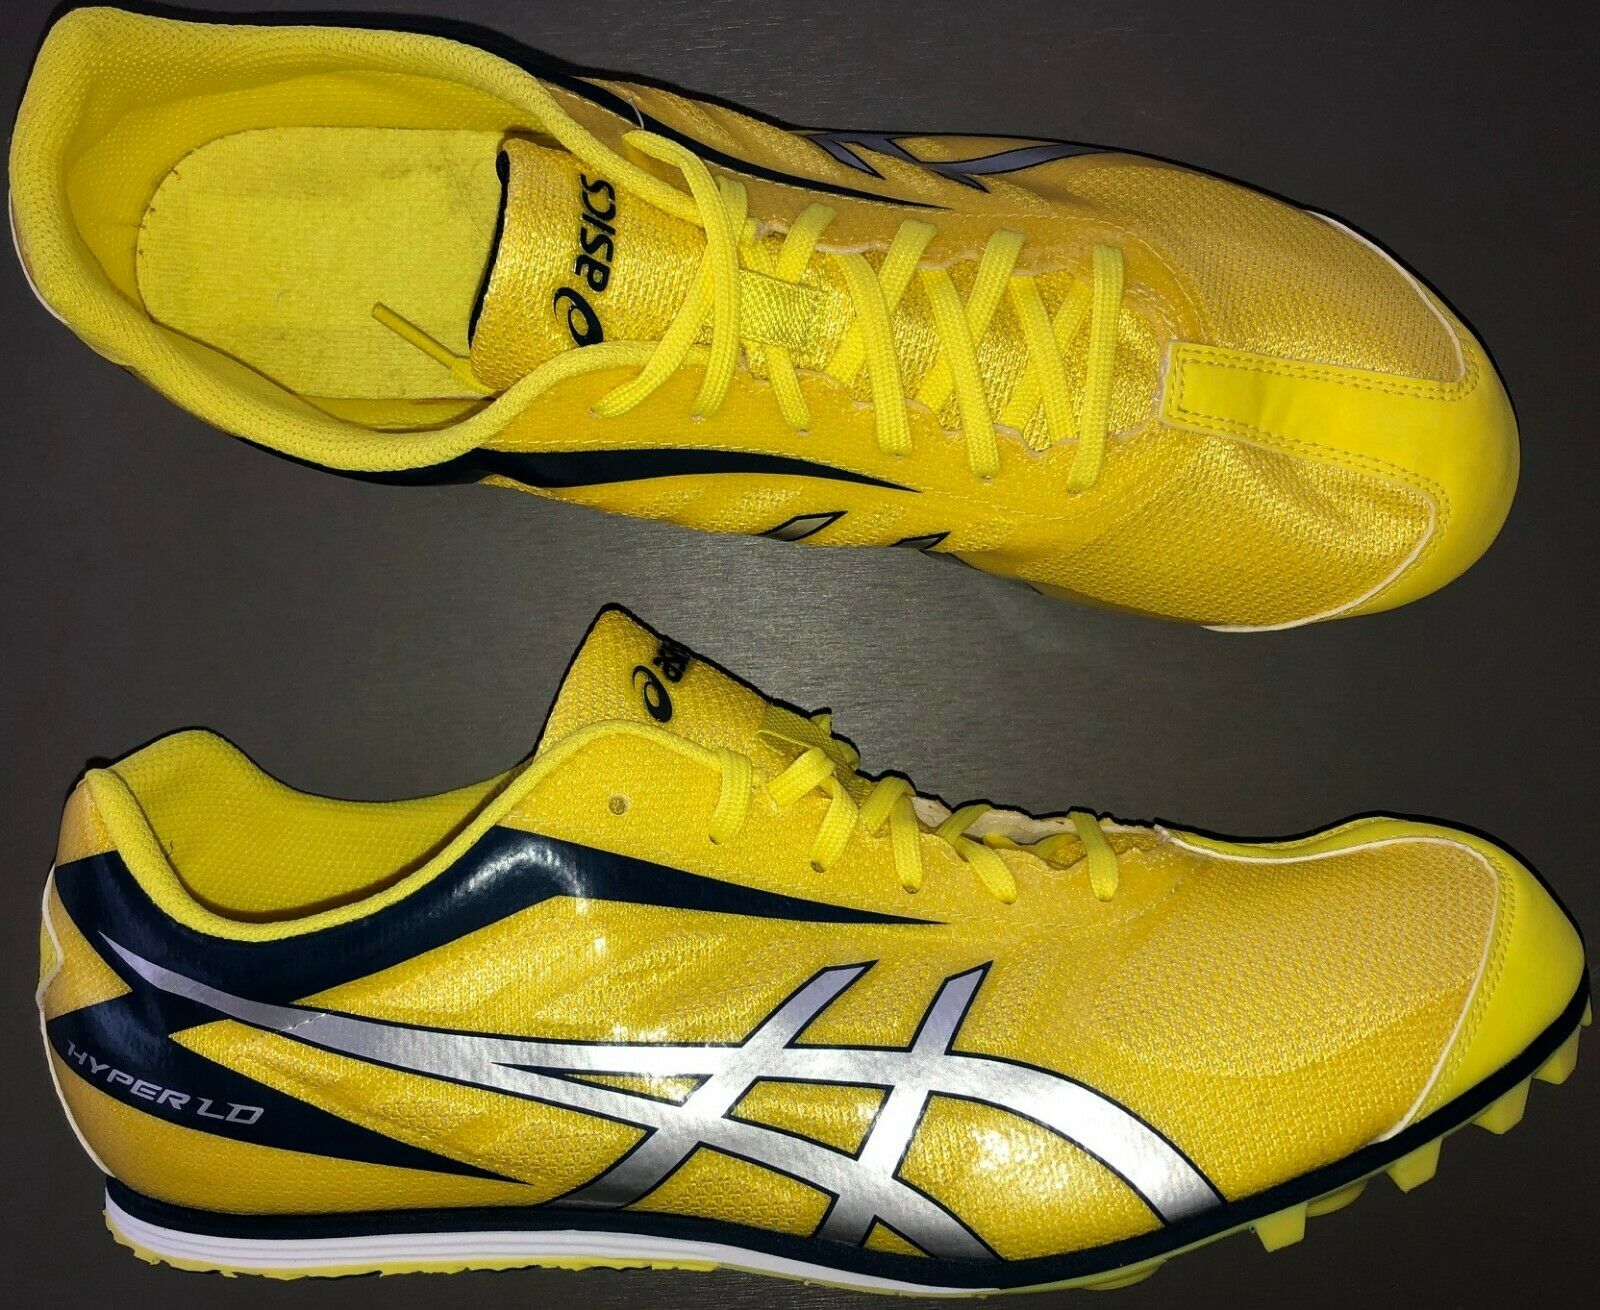 Asics Hyper Md Track Shoes New Men's 13 Neon Yellow (no Spikes) Free Shipping